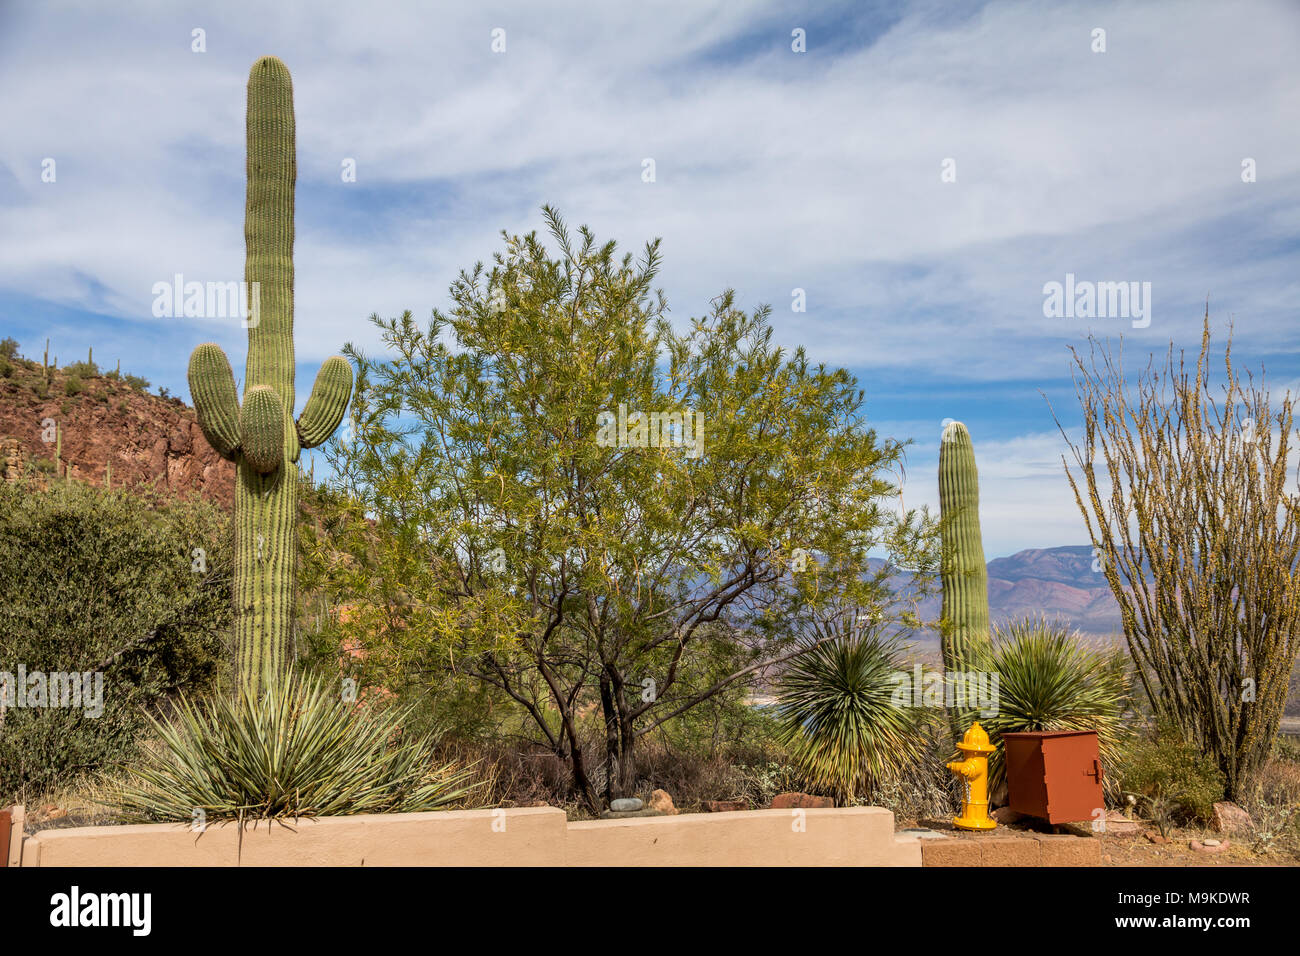 With stubby arms high on its body and a rounded top, a little yellow fire hydrant in Tonto Monument looks like it is imitating the Saguaro cactus Stock Photo